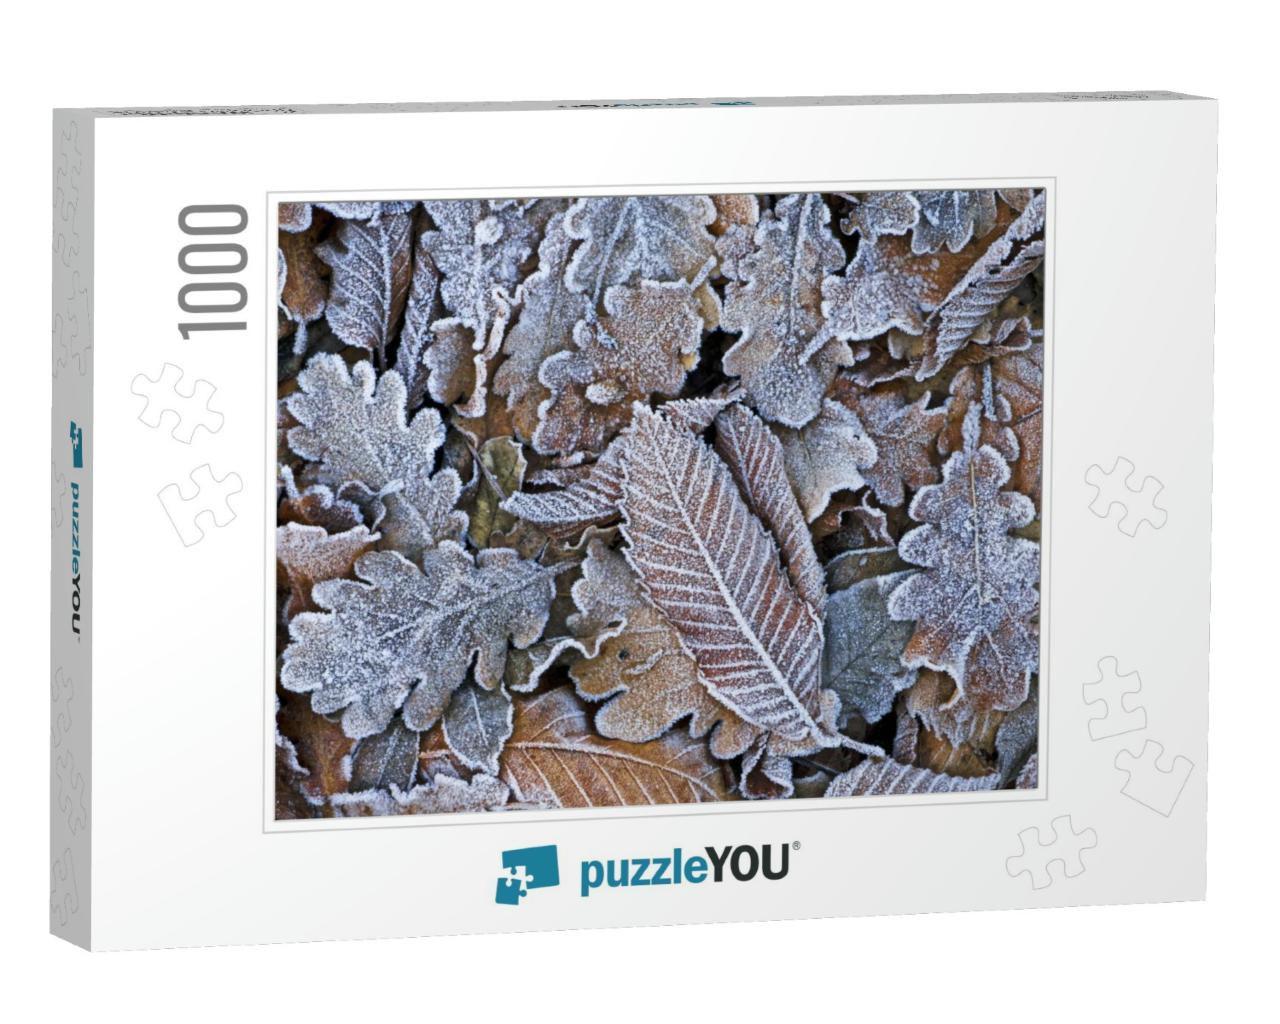 Texture of Some Leaves Covered by Snow & Ice on a Winter... Jigsaw Puzzle with 1000 pieces